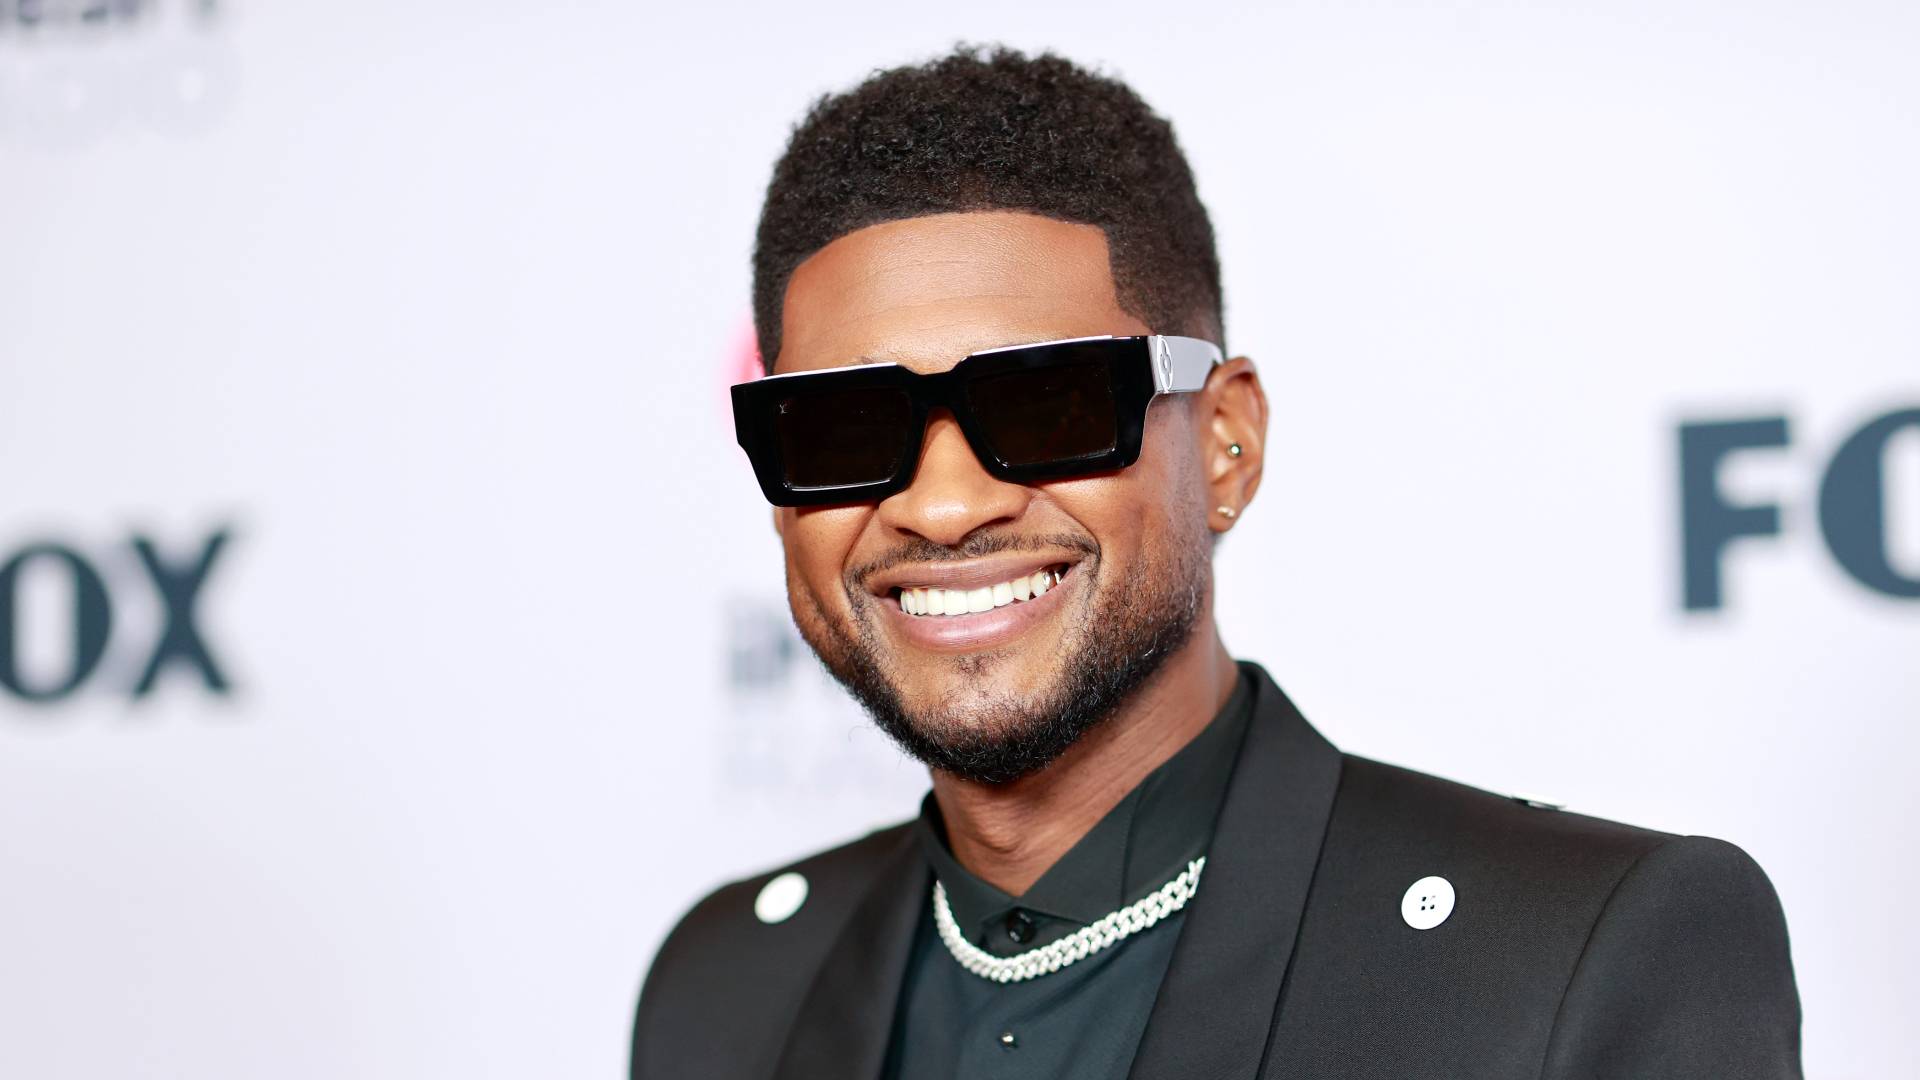 Usher attends the 2021 iHeartRadio Music Awards at The Dolby Theatre in Los Angeles, California, which was broadcast live on FOX on May 27, 2021. 